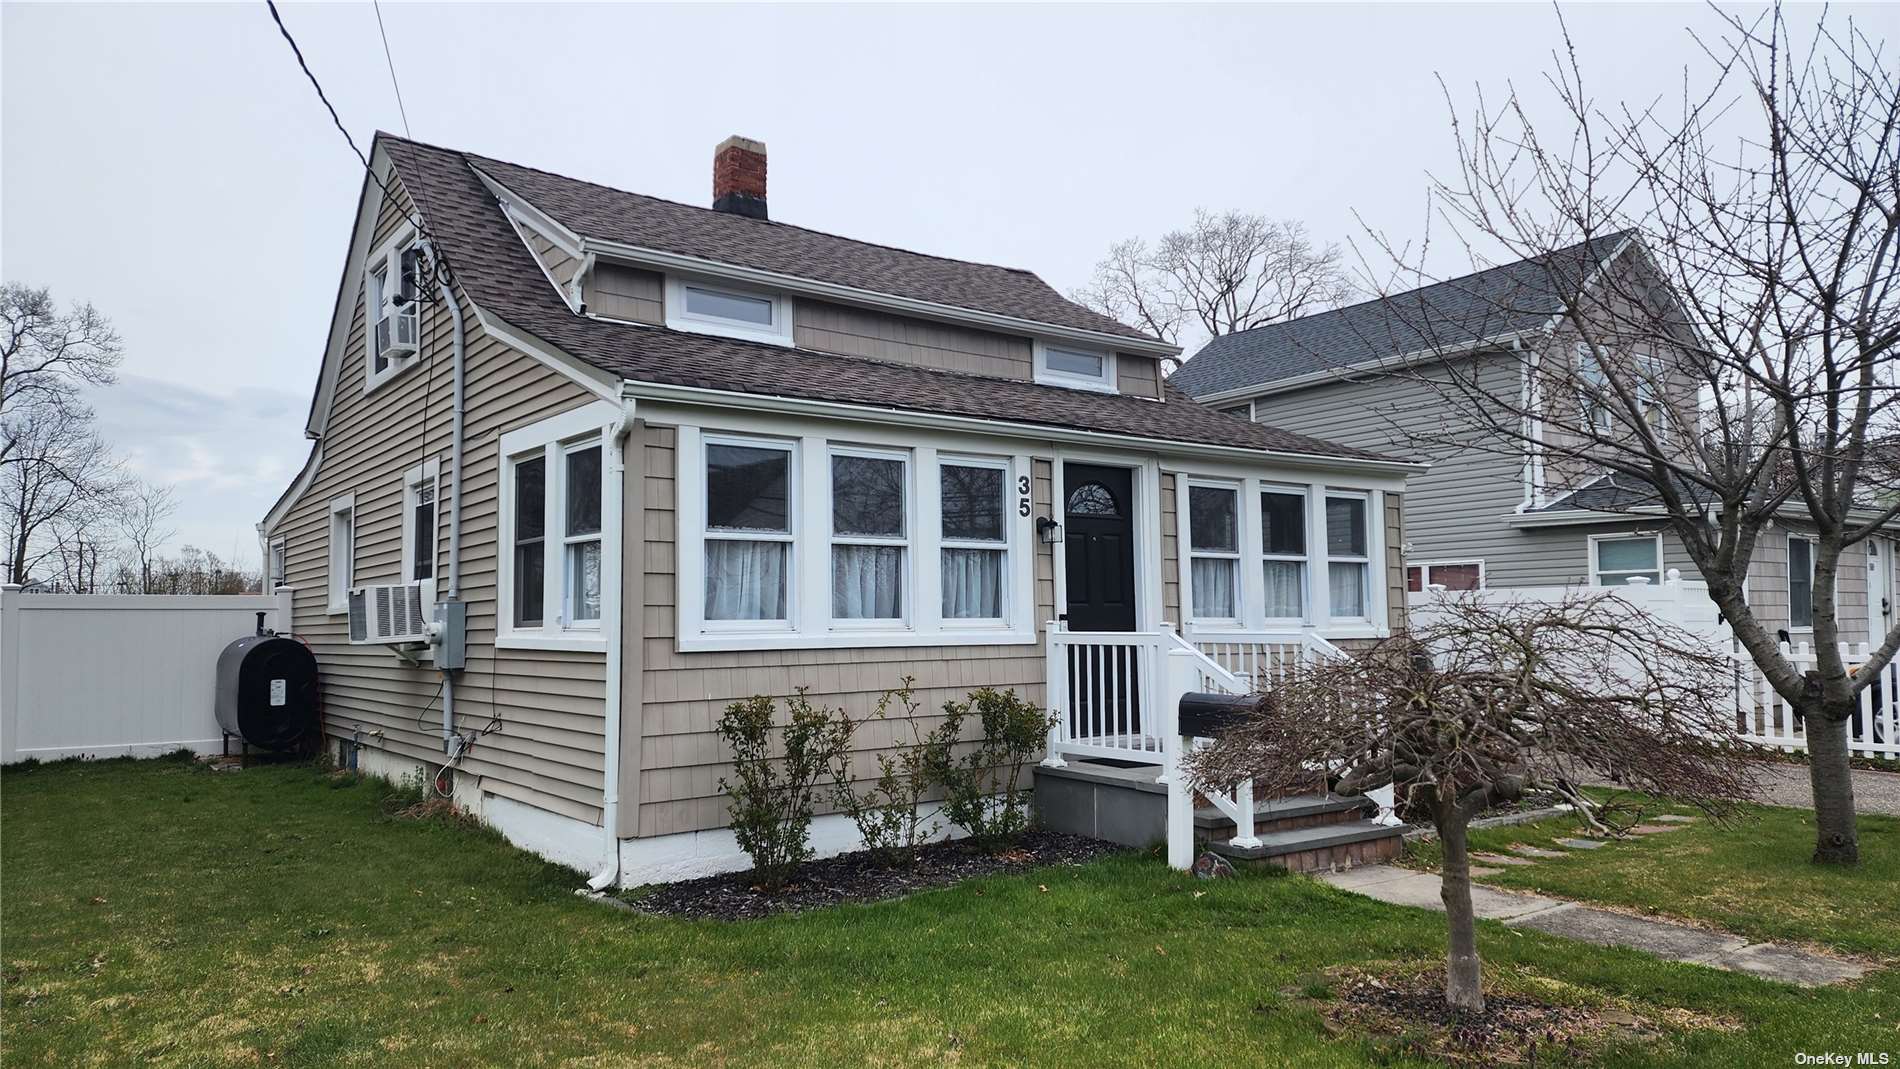 Listing in Patchogue, NY